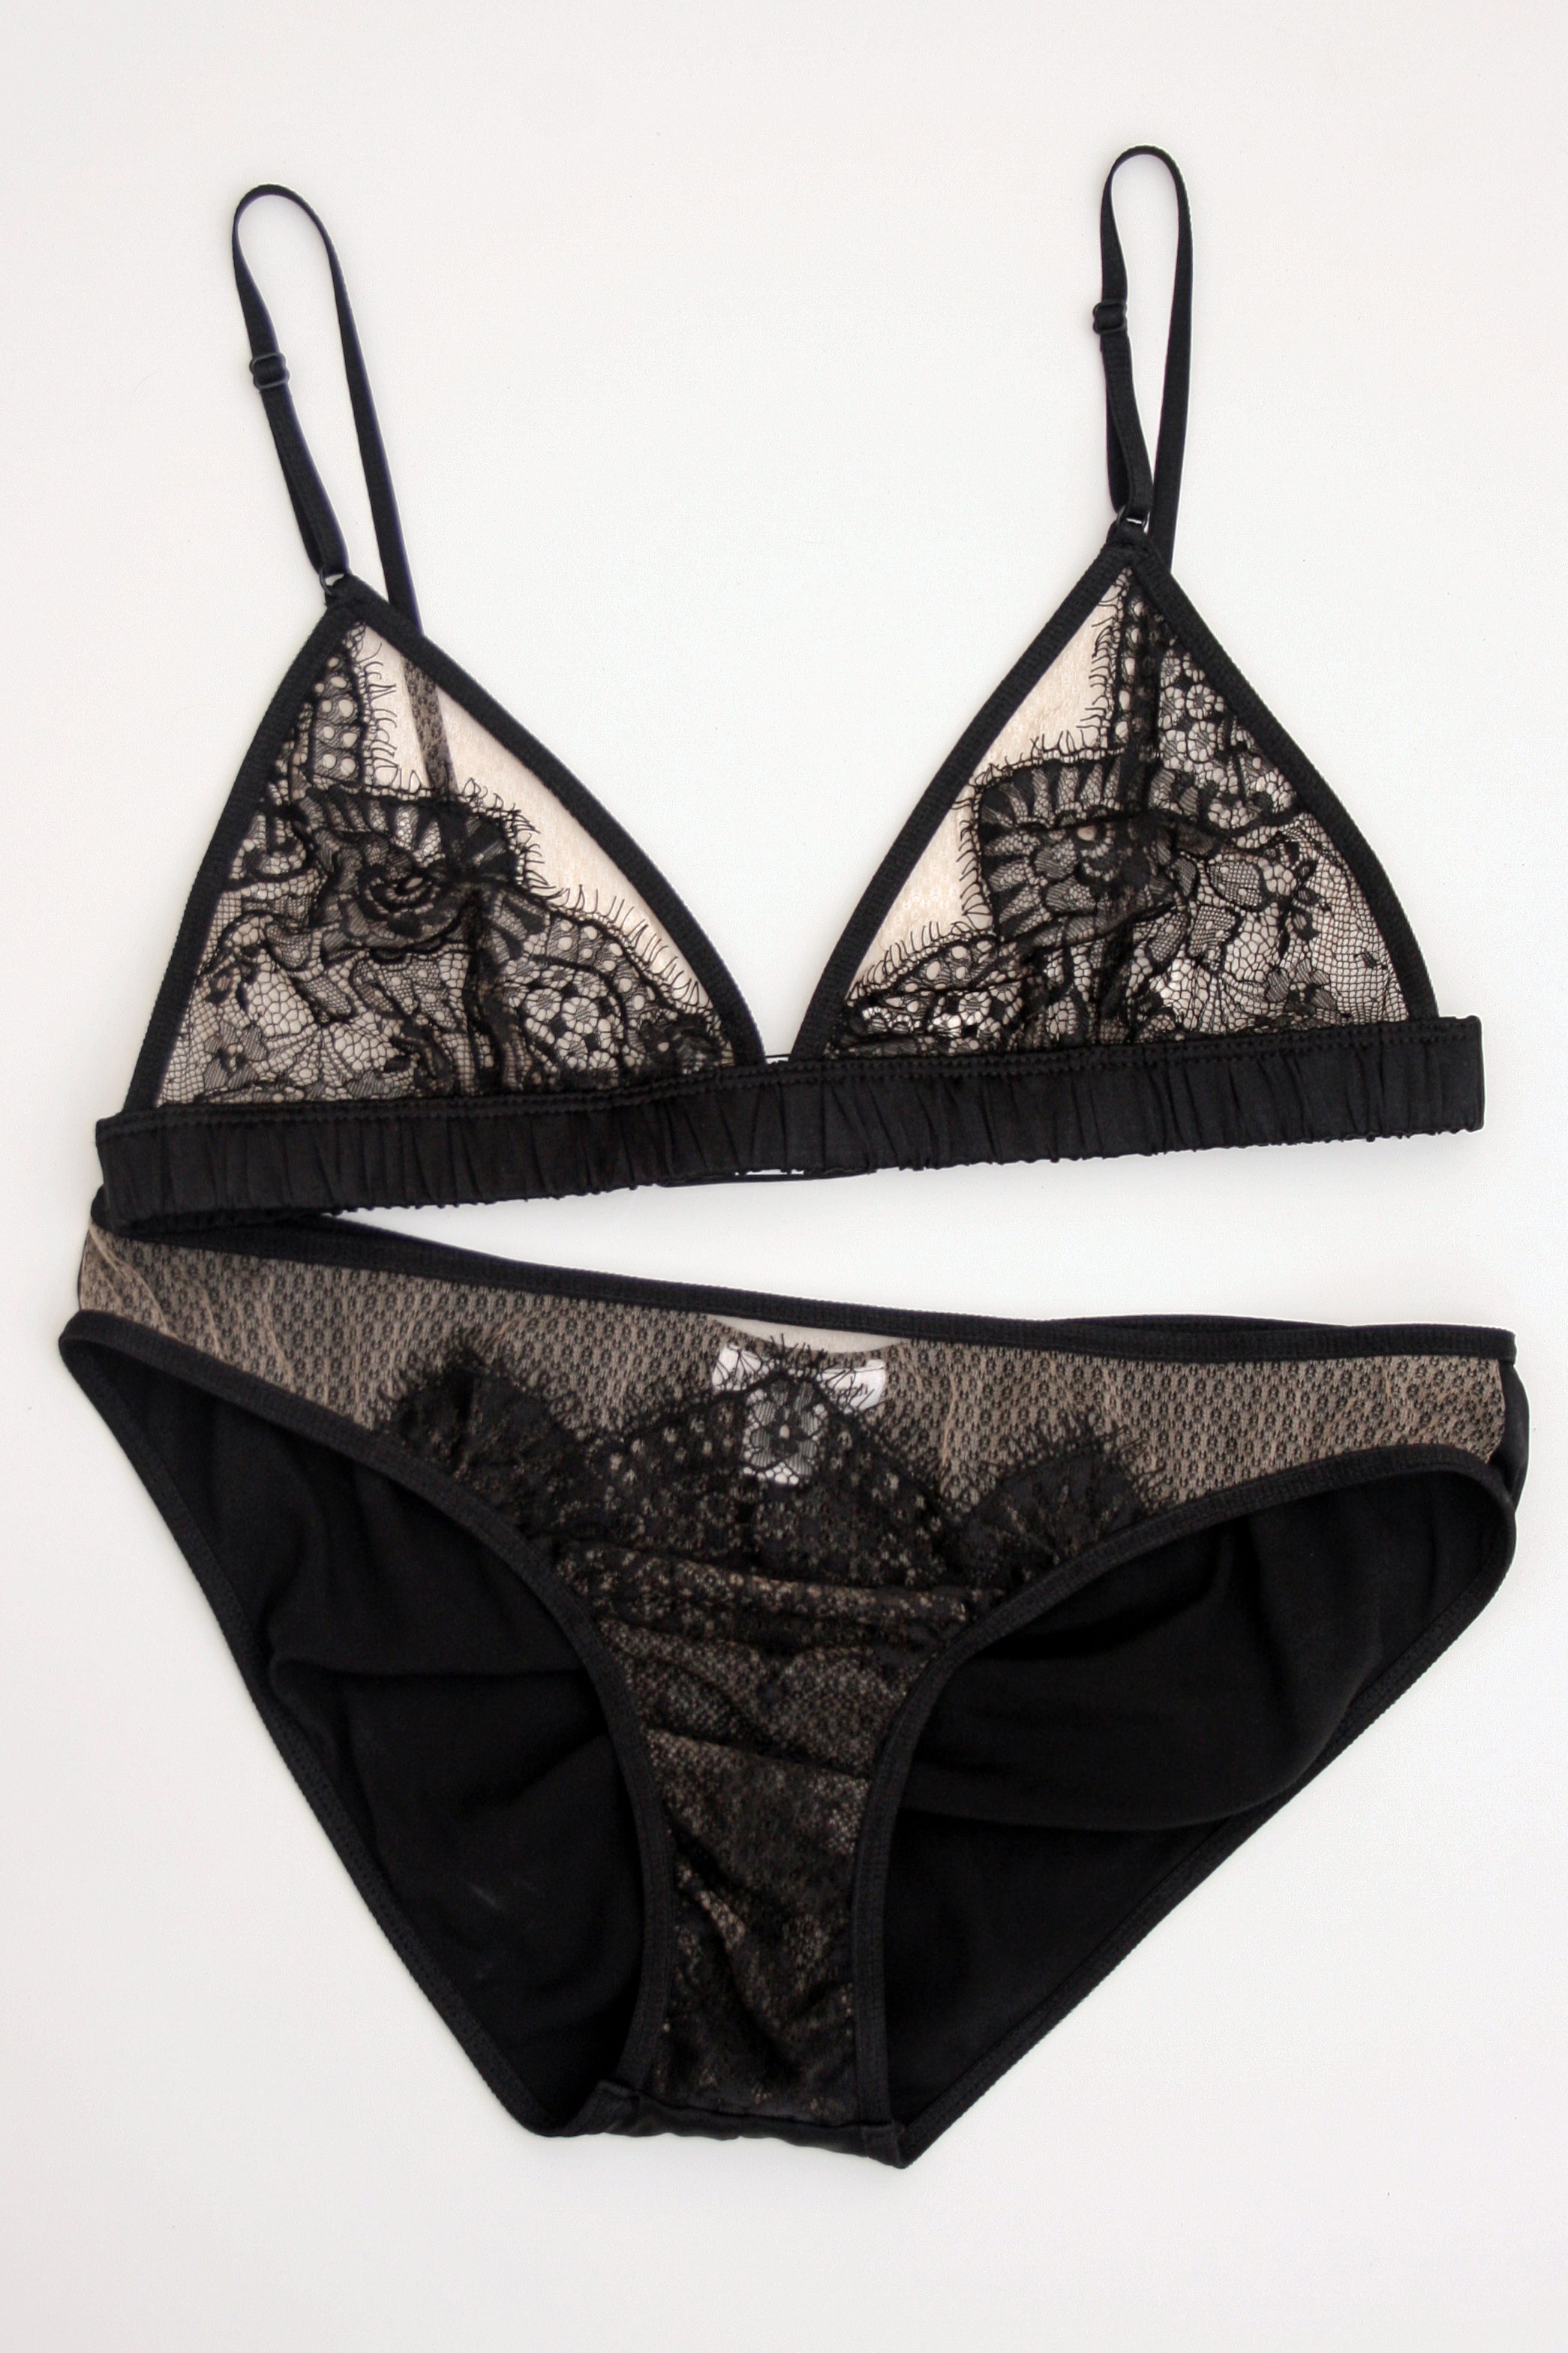 100% silk and french lace bra and panties set